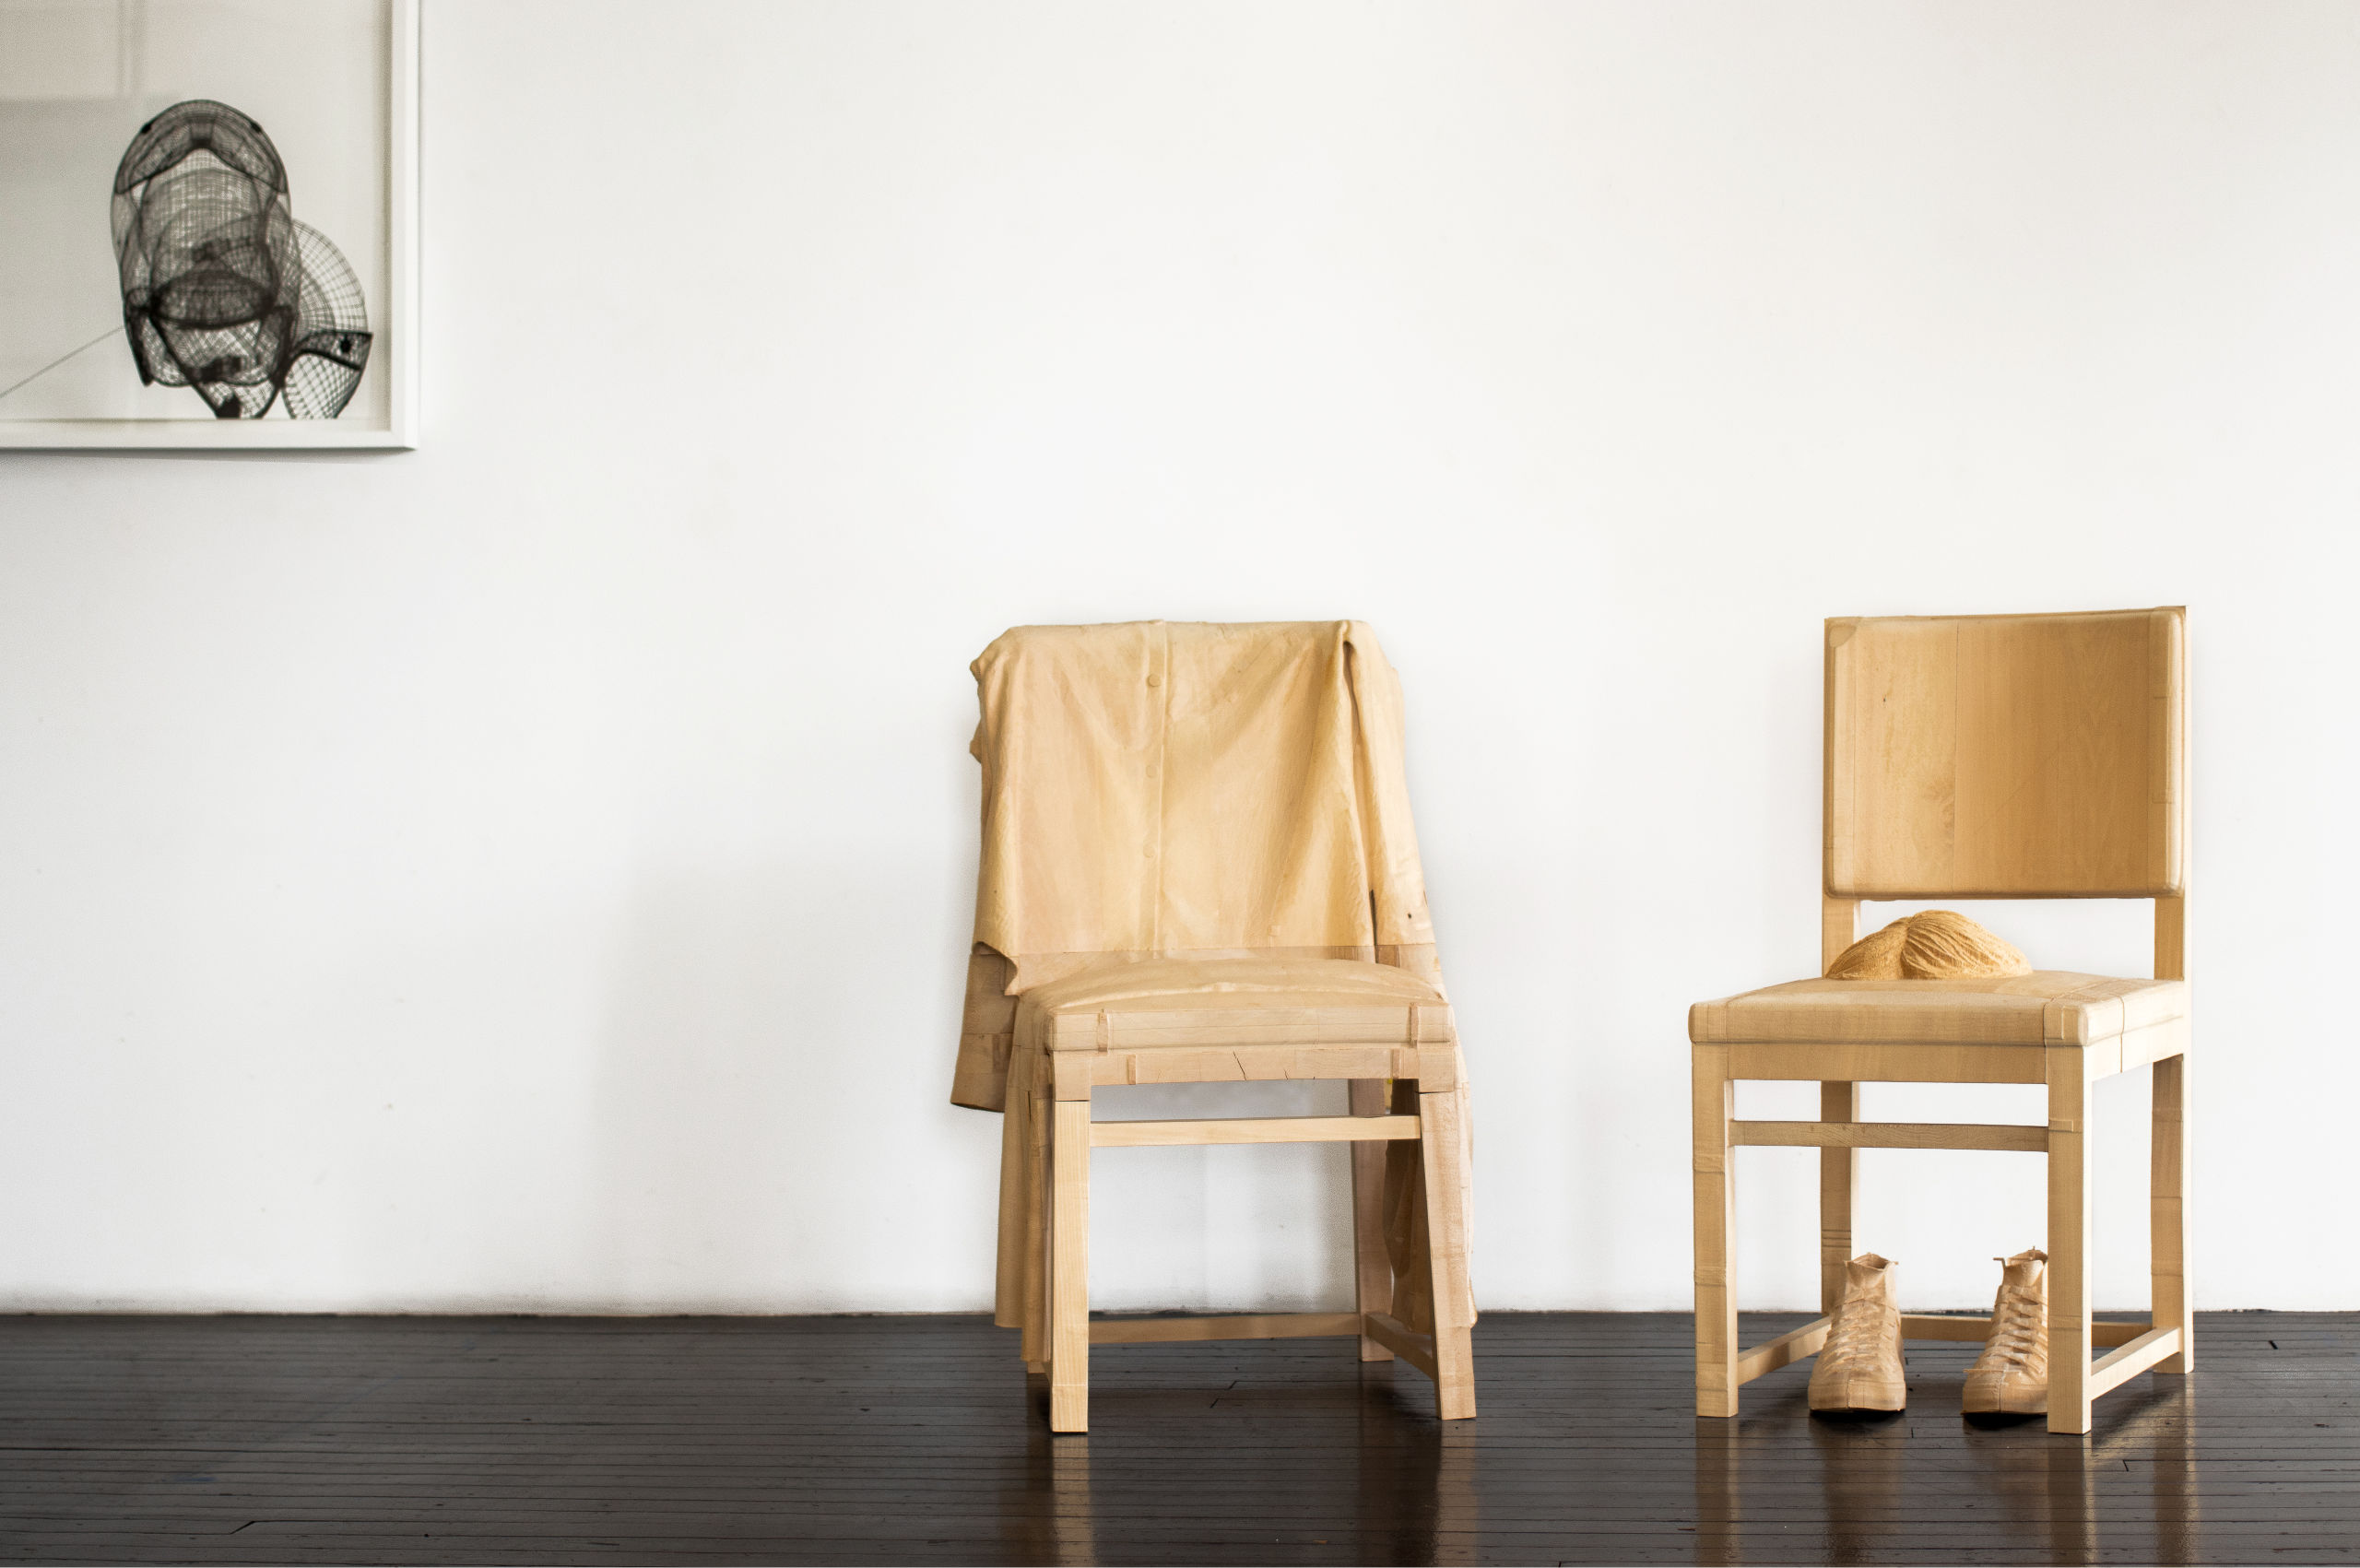 Wood sculpture of two chairs and shows next to black and white print, by Jonathan Brand.